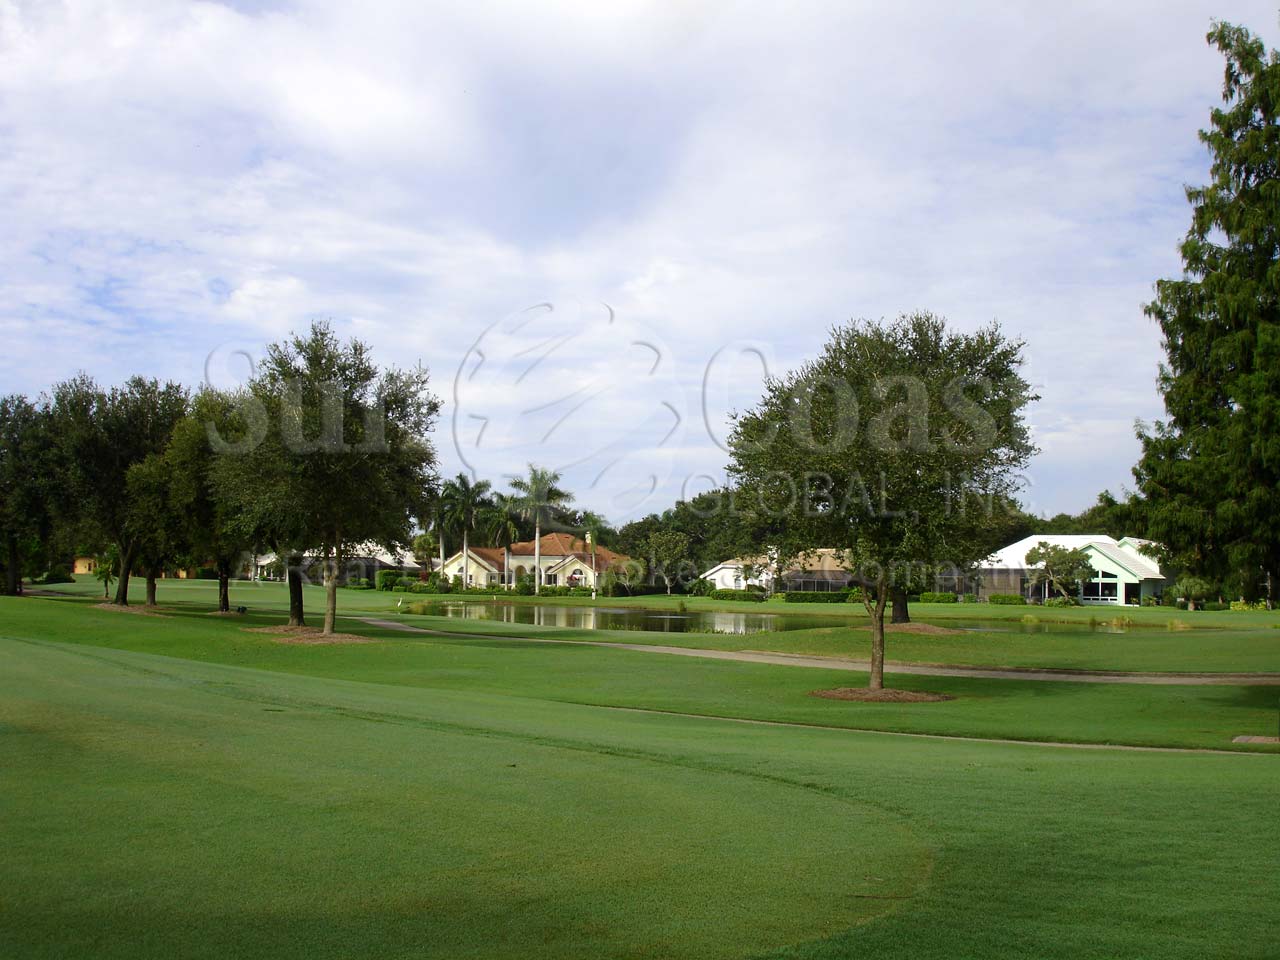 Rosemeade Community Lake and Green Course